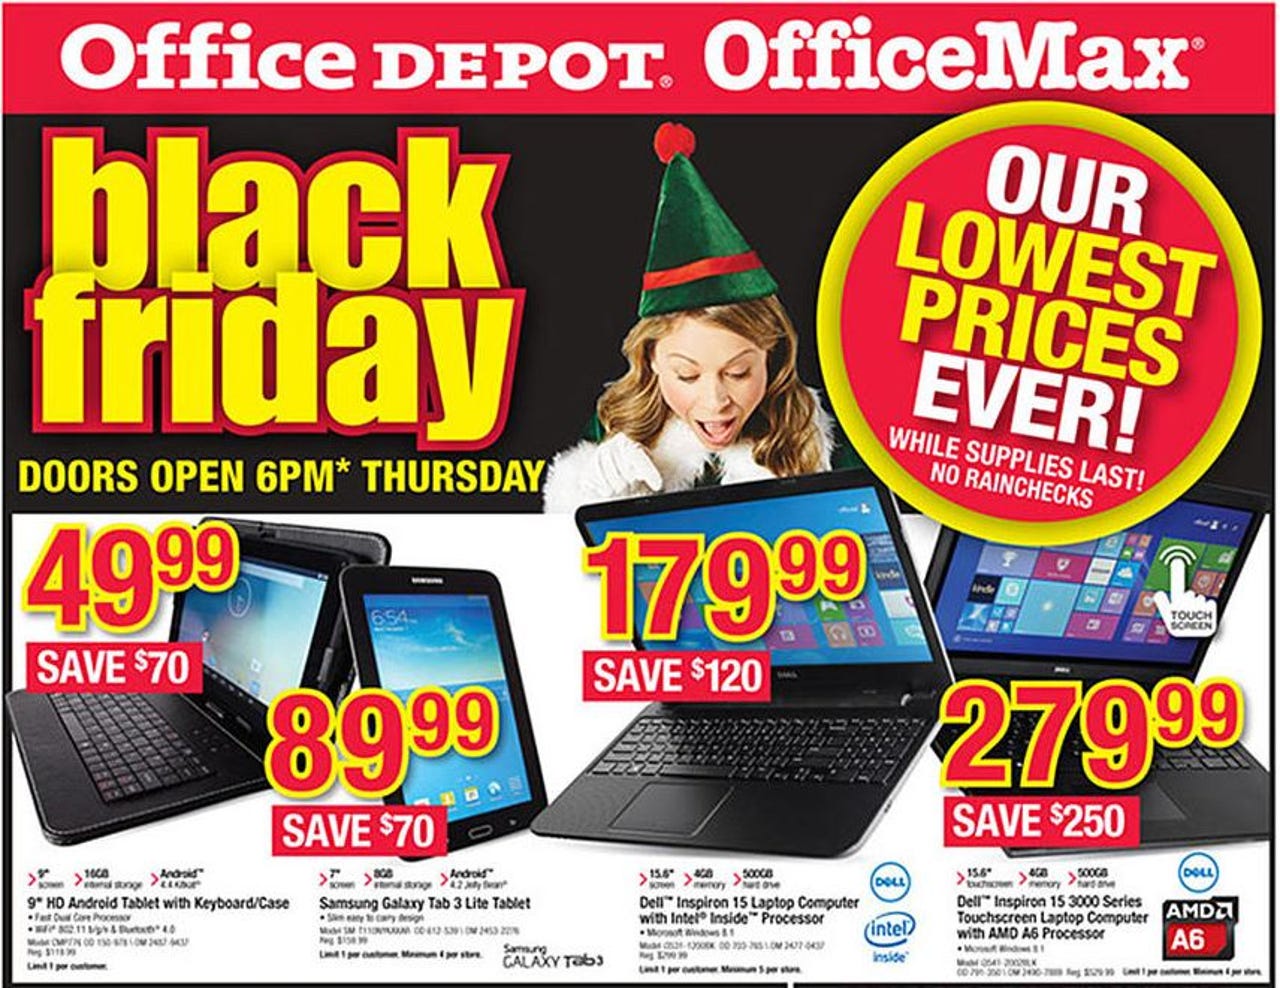 Office Depot & OfficeMax Black Friday 2014 deals include pair of sub-$200  Windows laptops | ZDNET